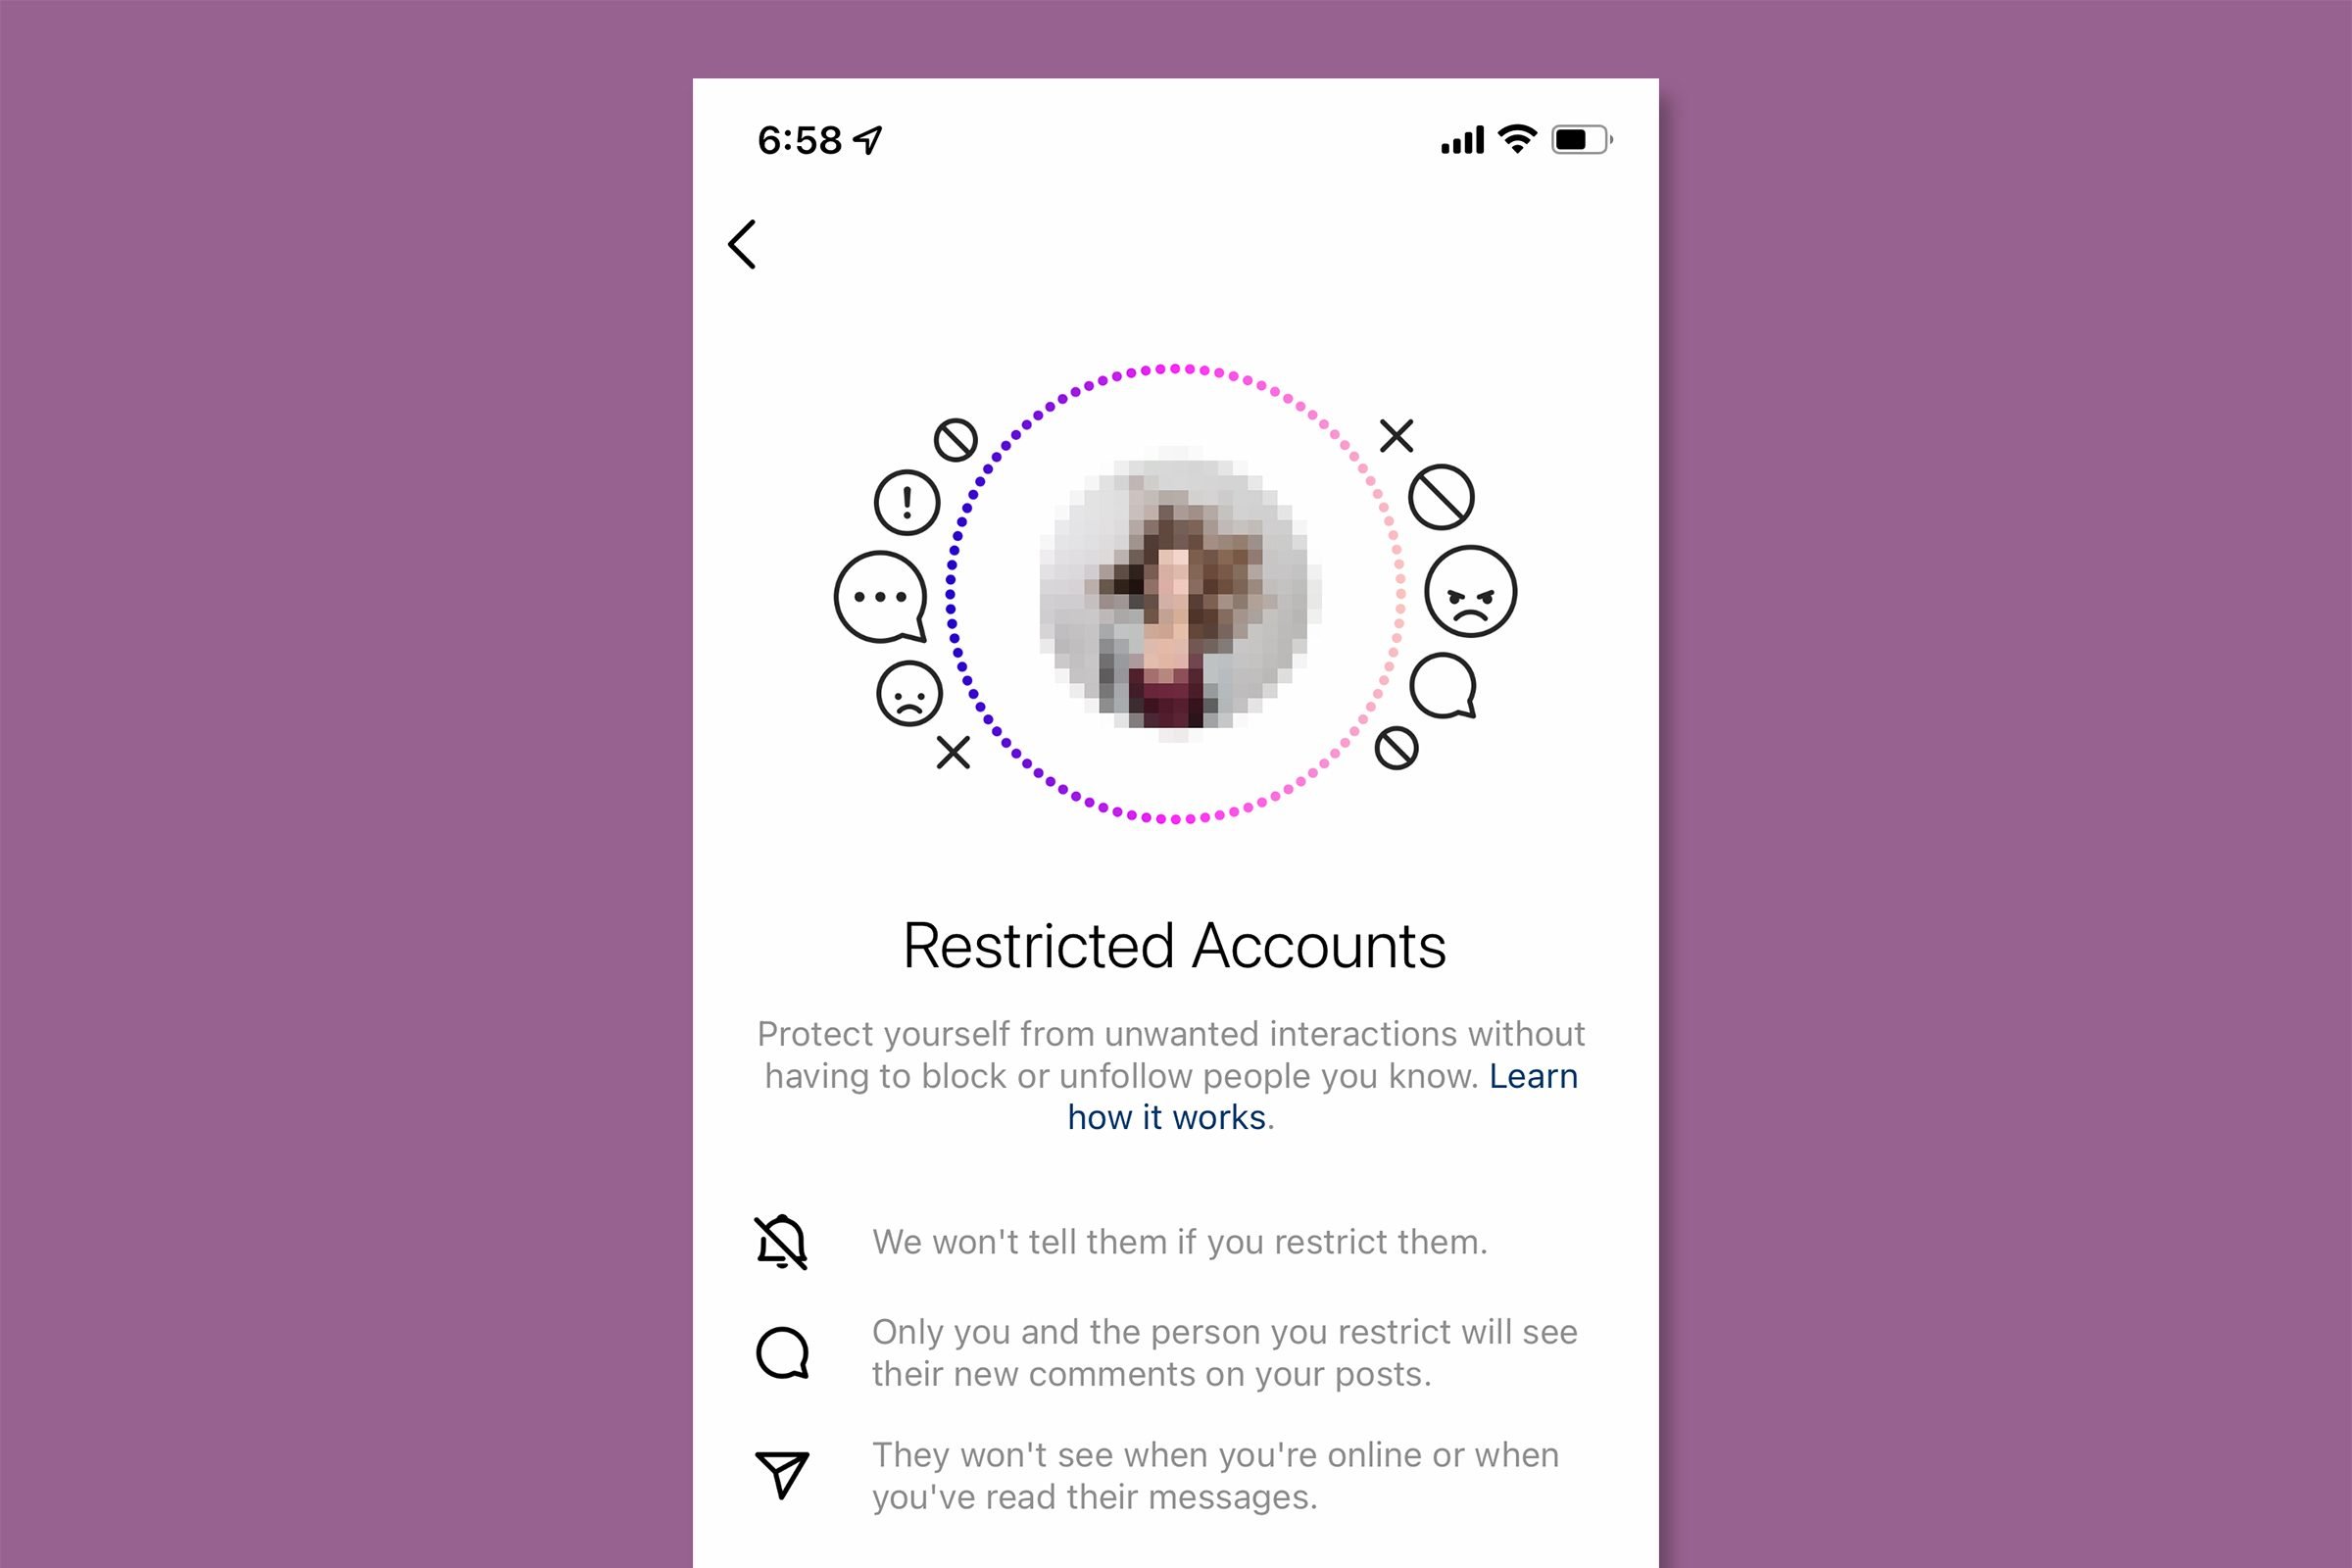 How you can check who is looking your profile picture, online status, and  last seen